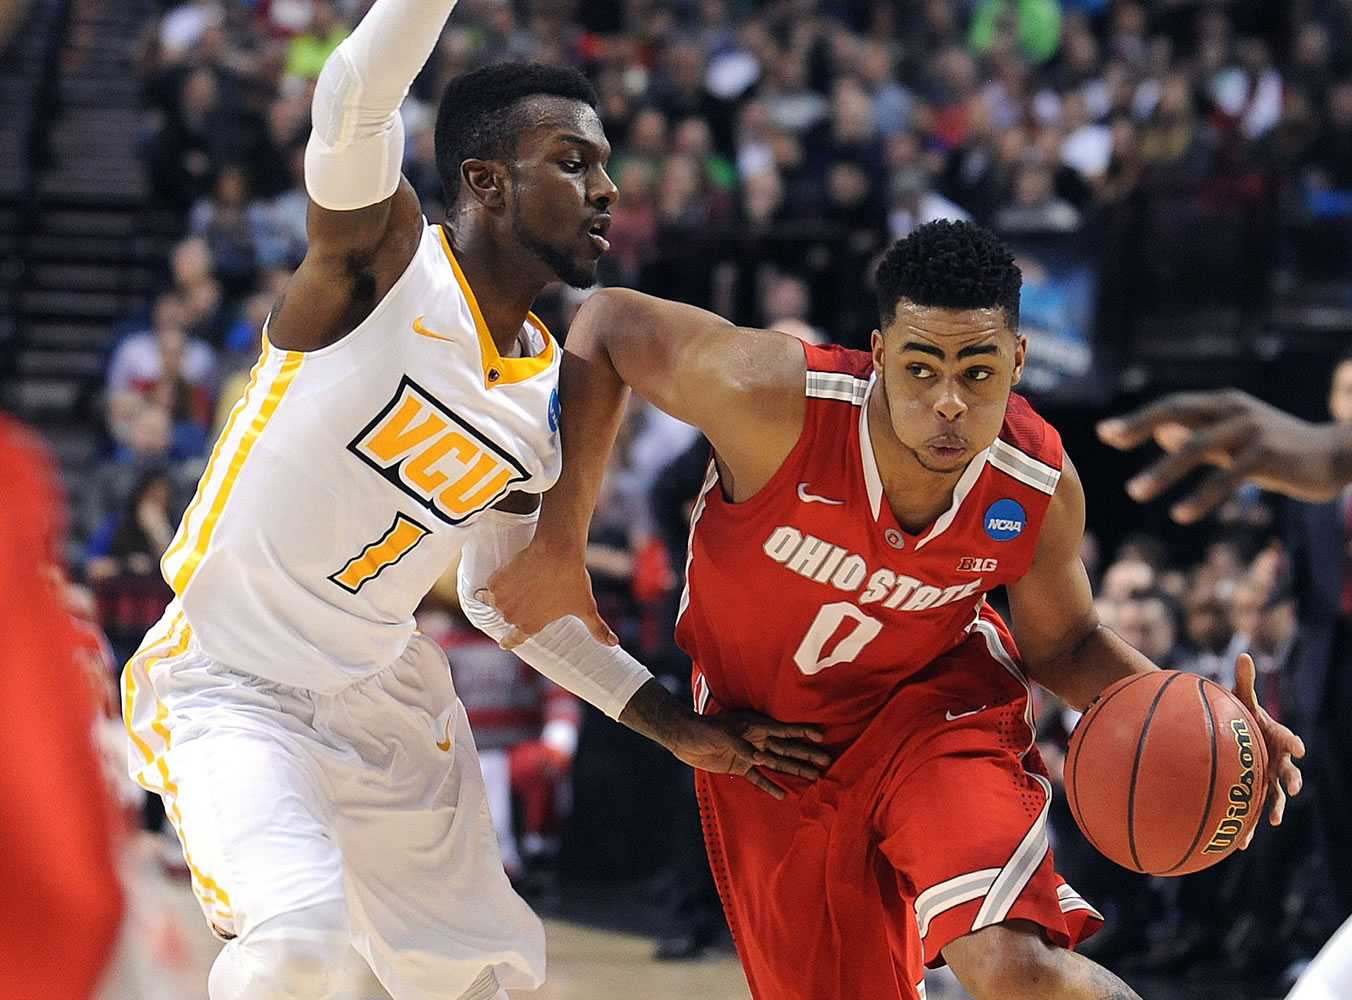 Ohio State guard D'Angelo Russell (0) drives against Virginia Commonwealth's JeQuan Lewis.